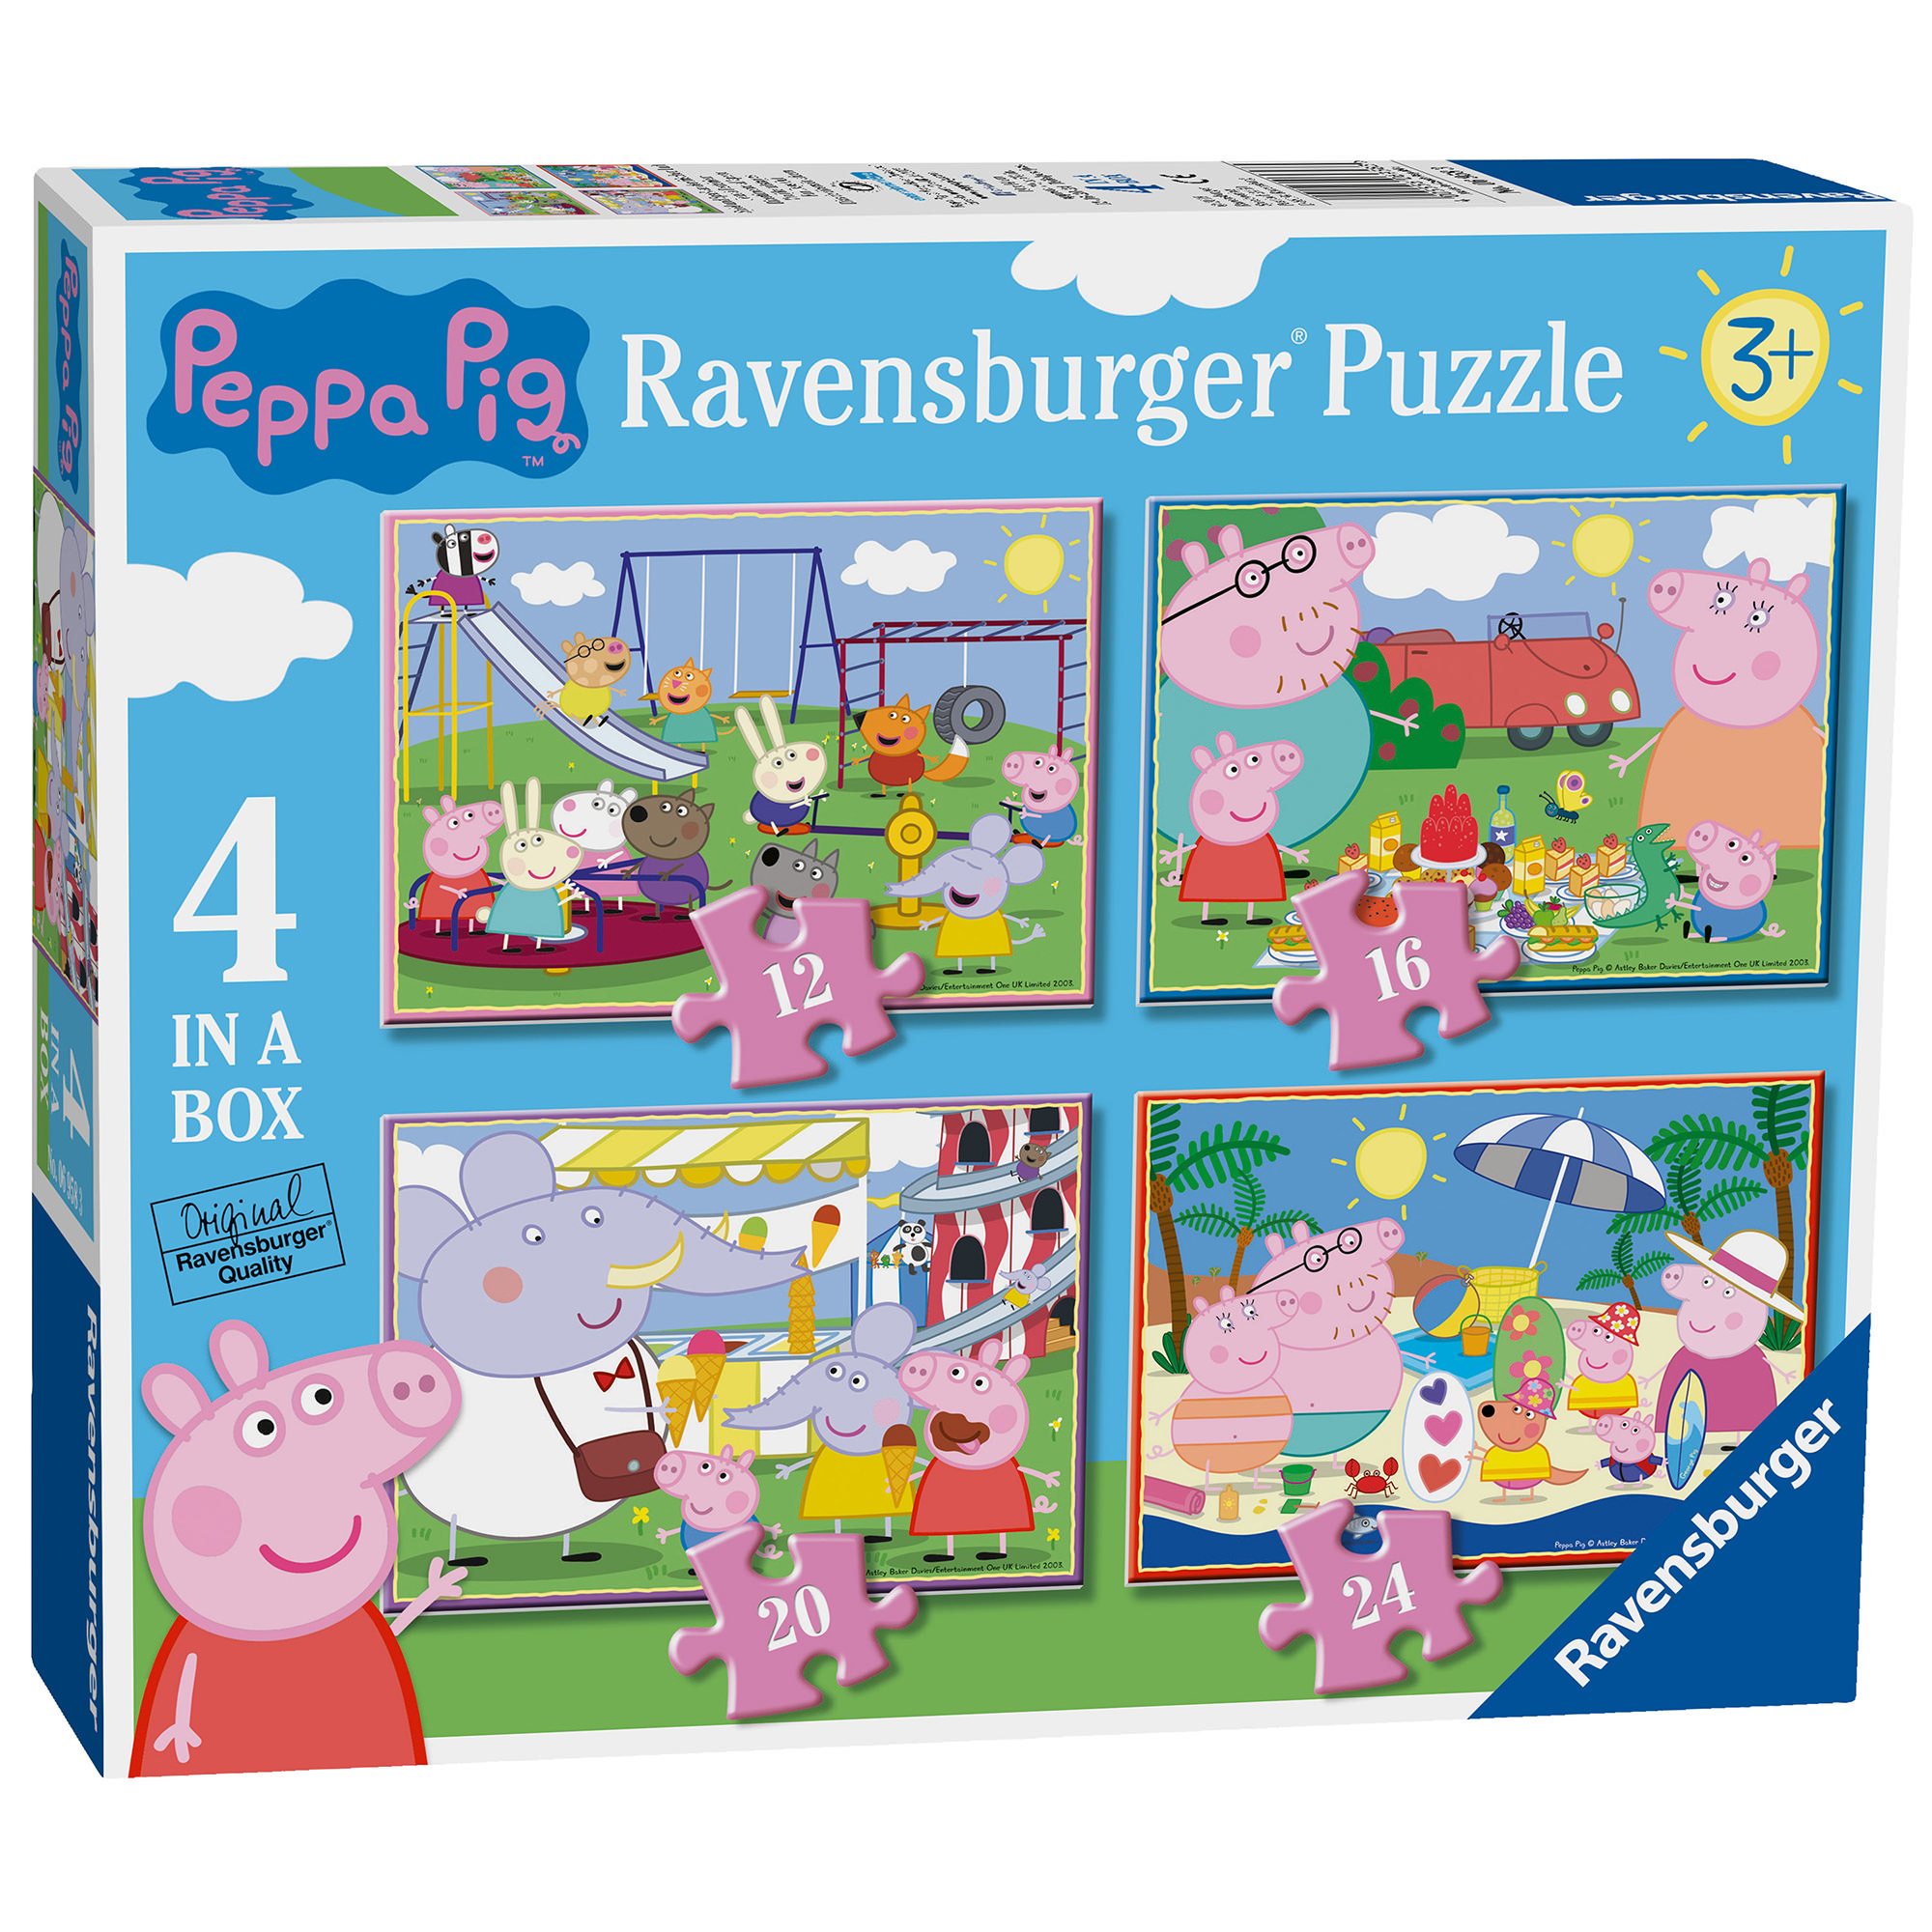 12, 16, 20, 24 Pieces Jigsaw Puzzles for Kids Age 3 Years Up Ravensburger Peppa Pig Four Seasons 4 in Box